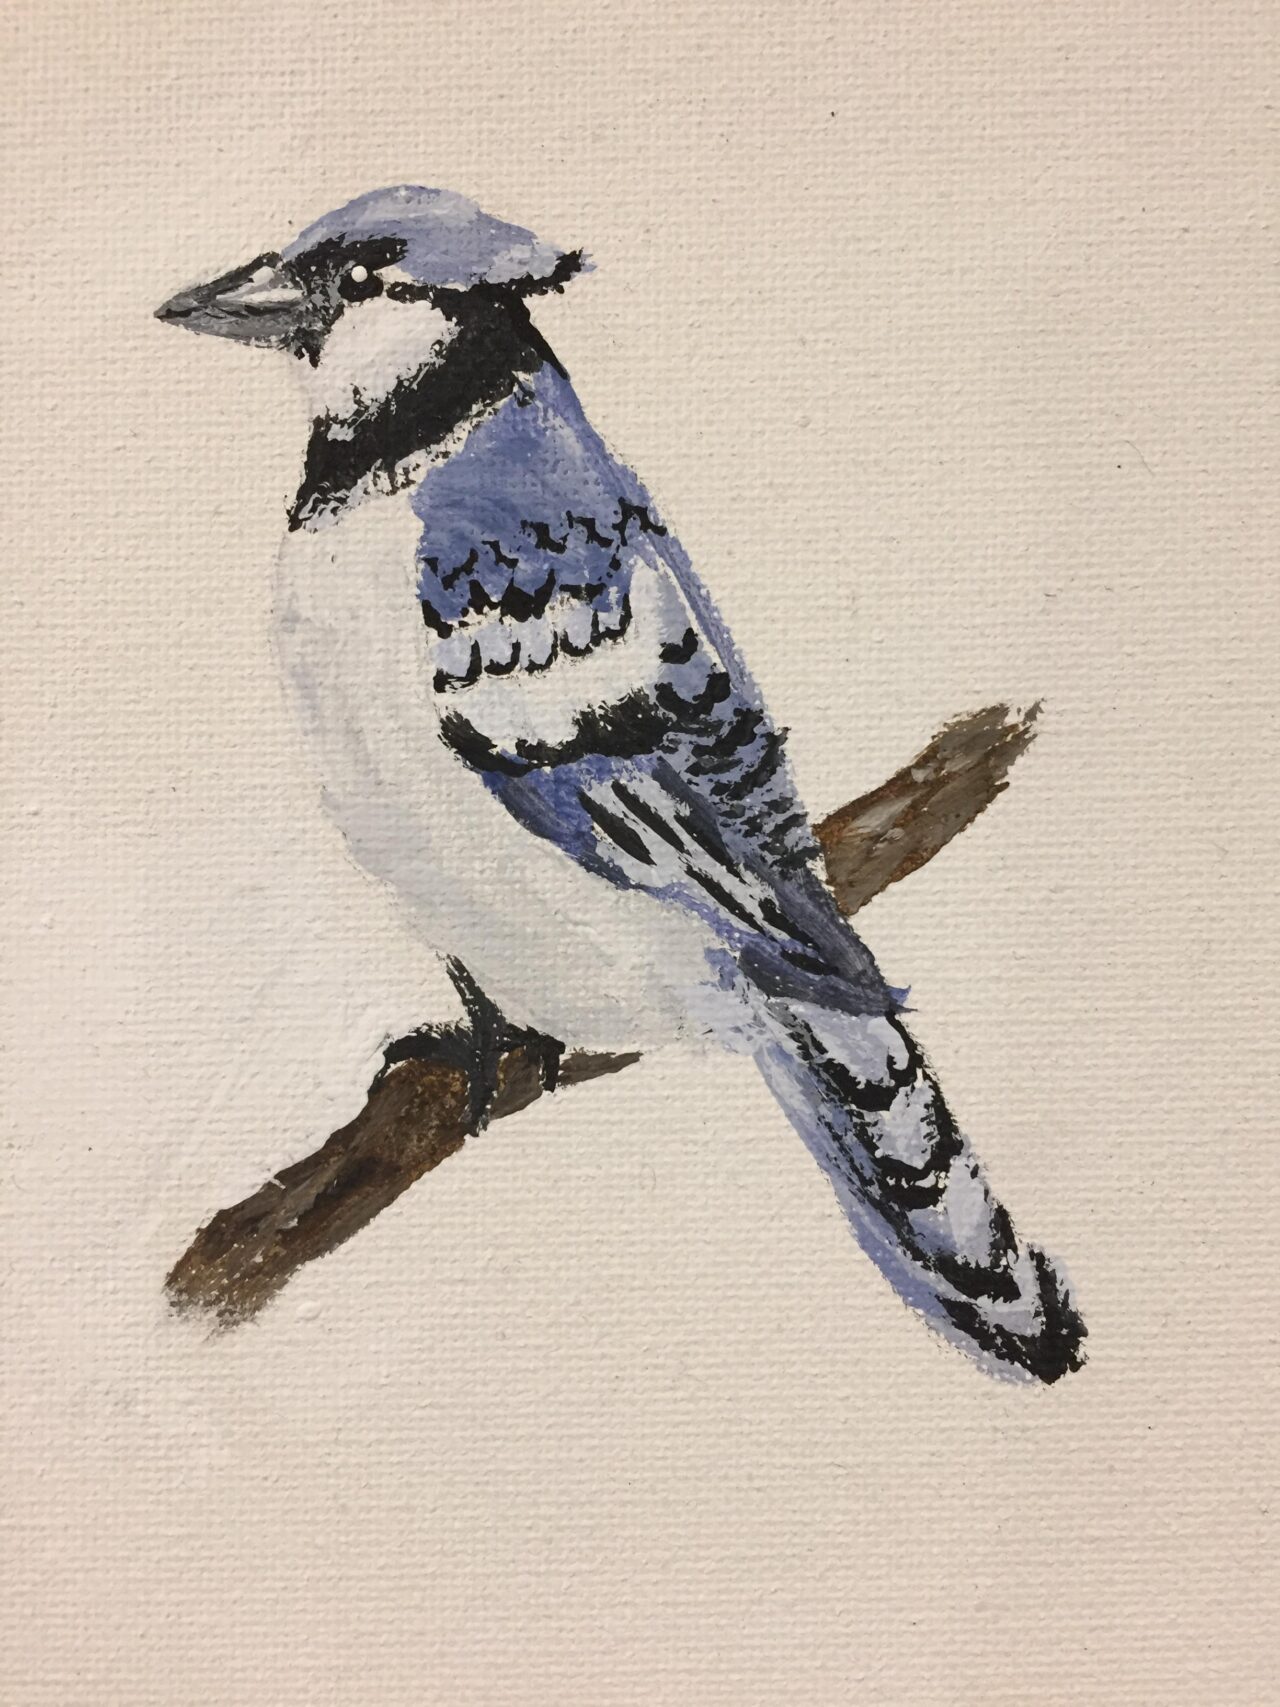 "Watchful Jay" by Claire Moreno